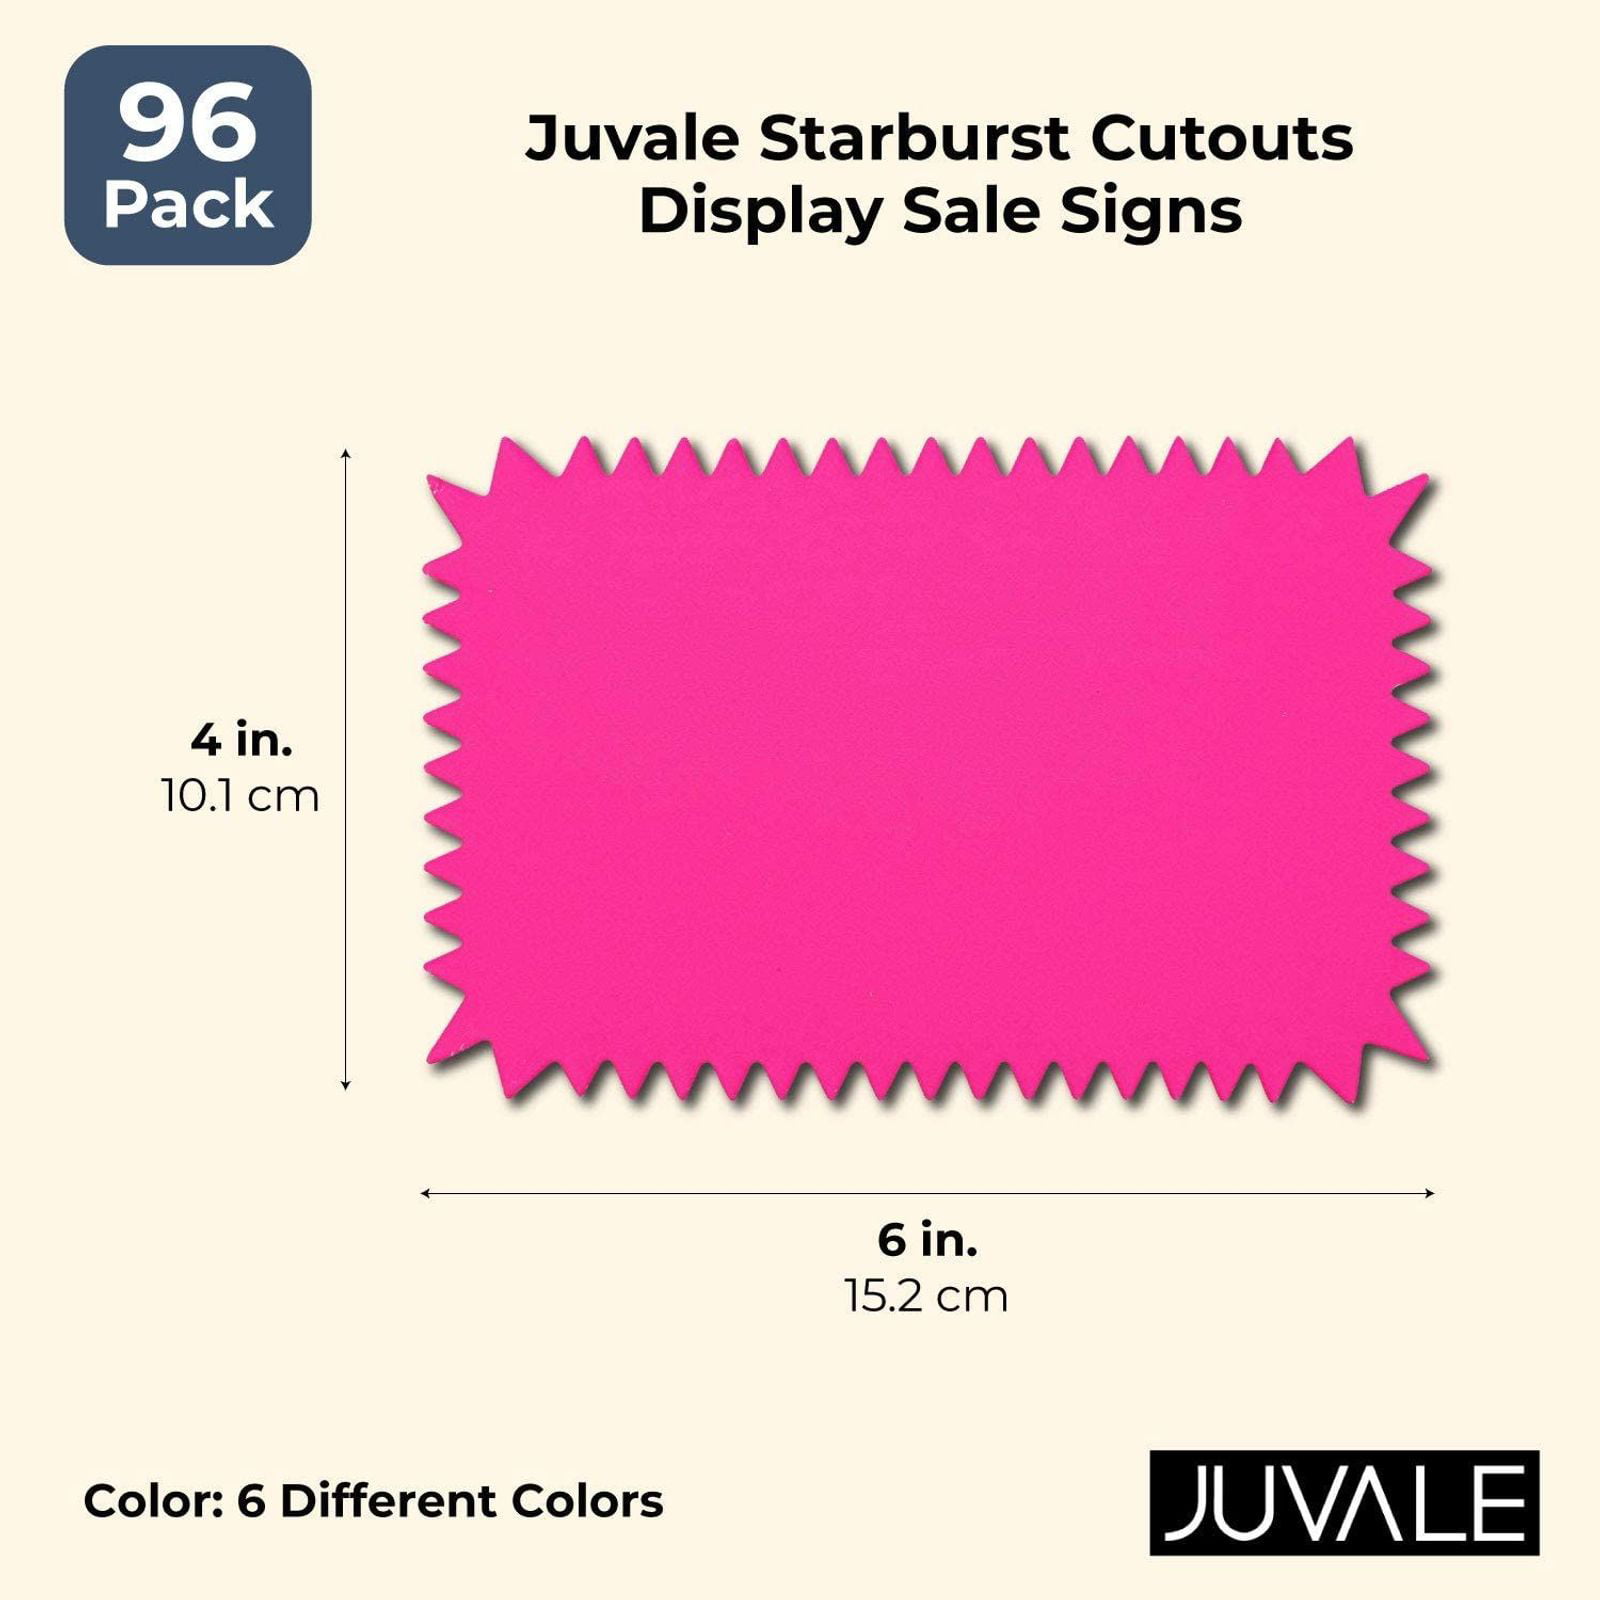 4 x 6 Inches 6 Colors Pack of 96 Juvale Starburst Cutouts Display Sale Signs 